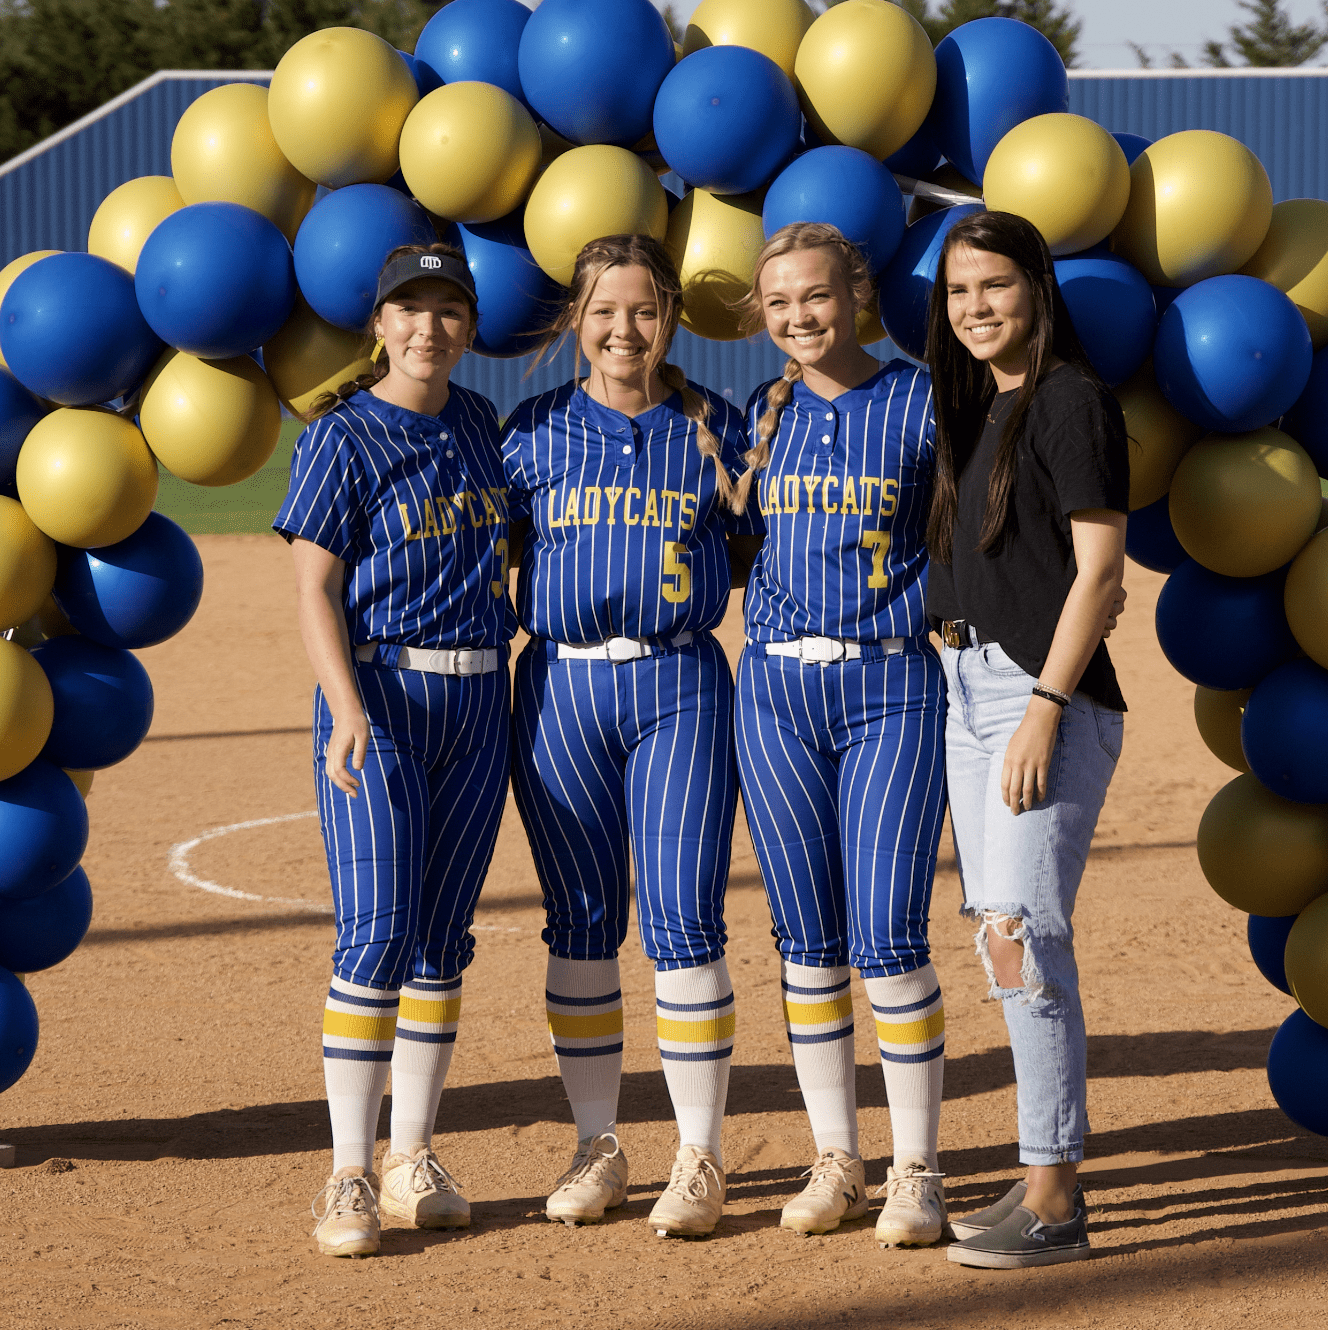 Lady Cats clinch district championship with Senior Night win